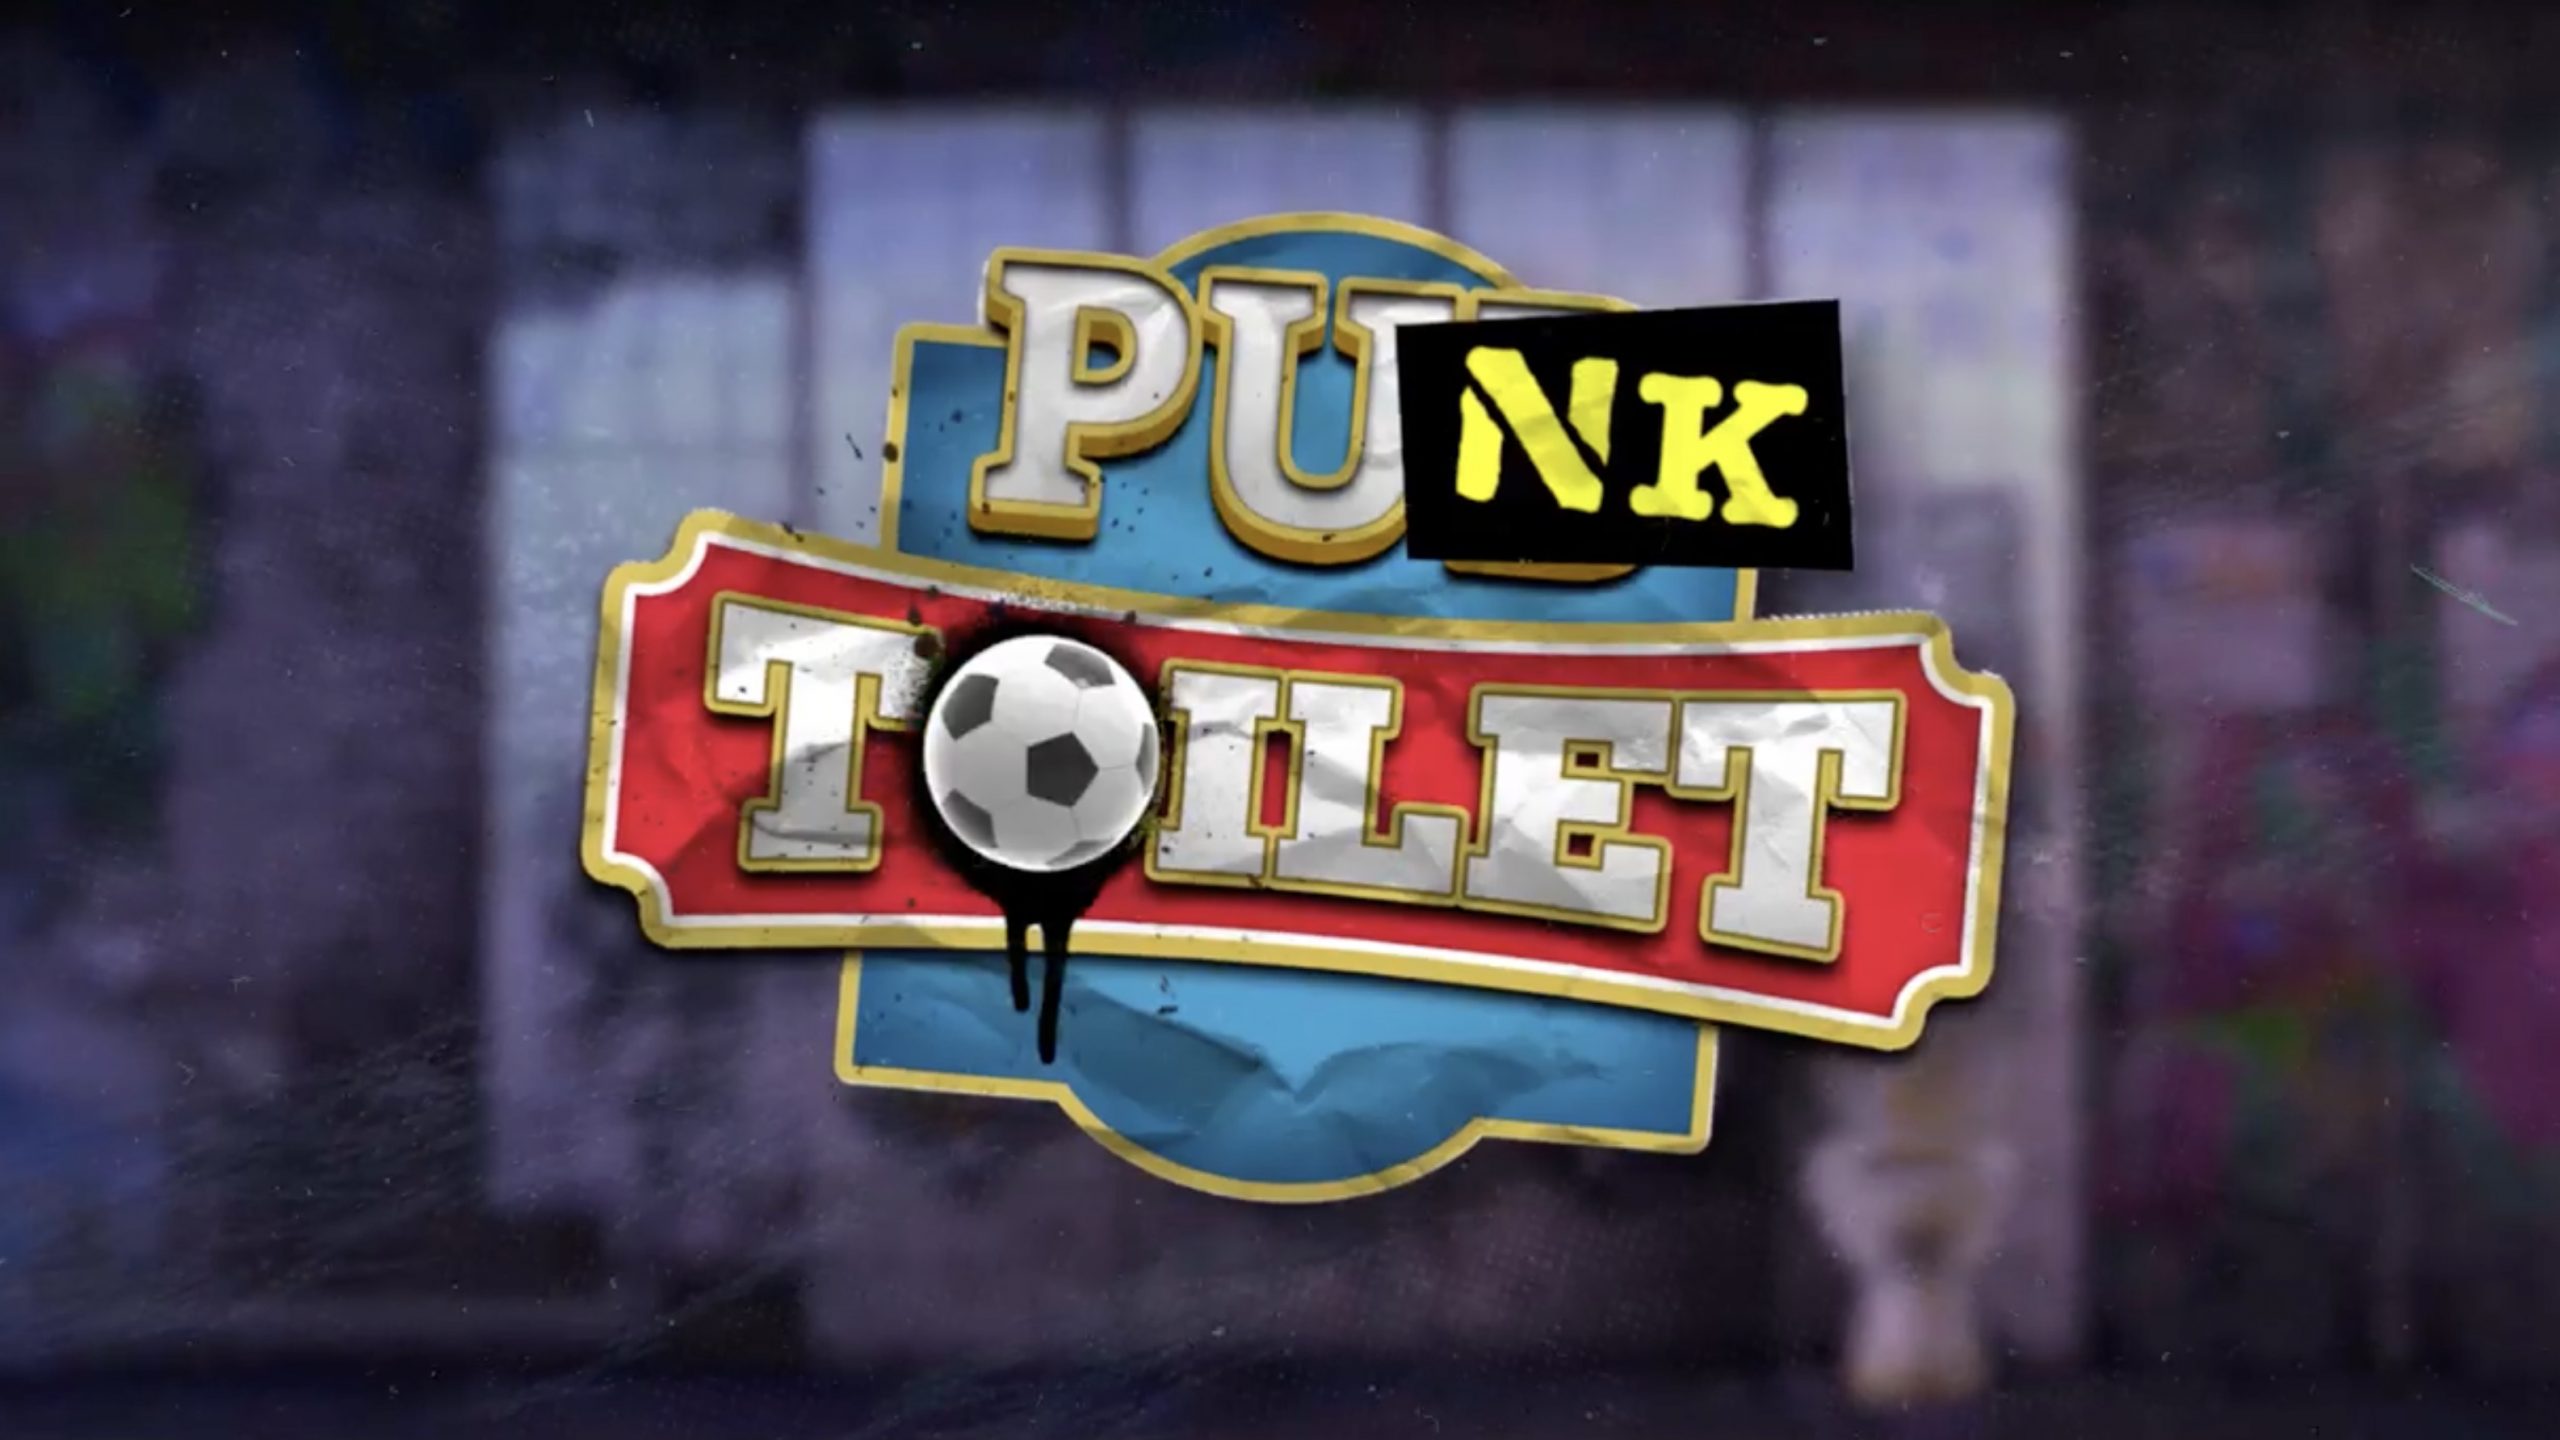 Punk Toilet is a 3x3-3-3-3-1, 81-payline video slot that incorporates xWays and xSpins mechanics and a max win of x33,333 the bet.